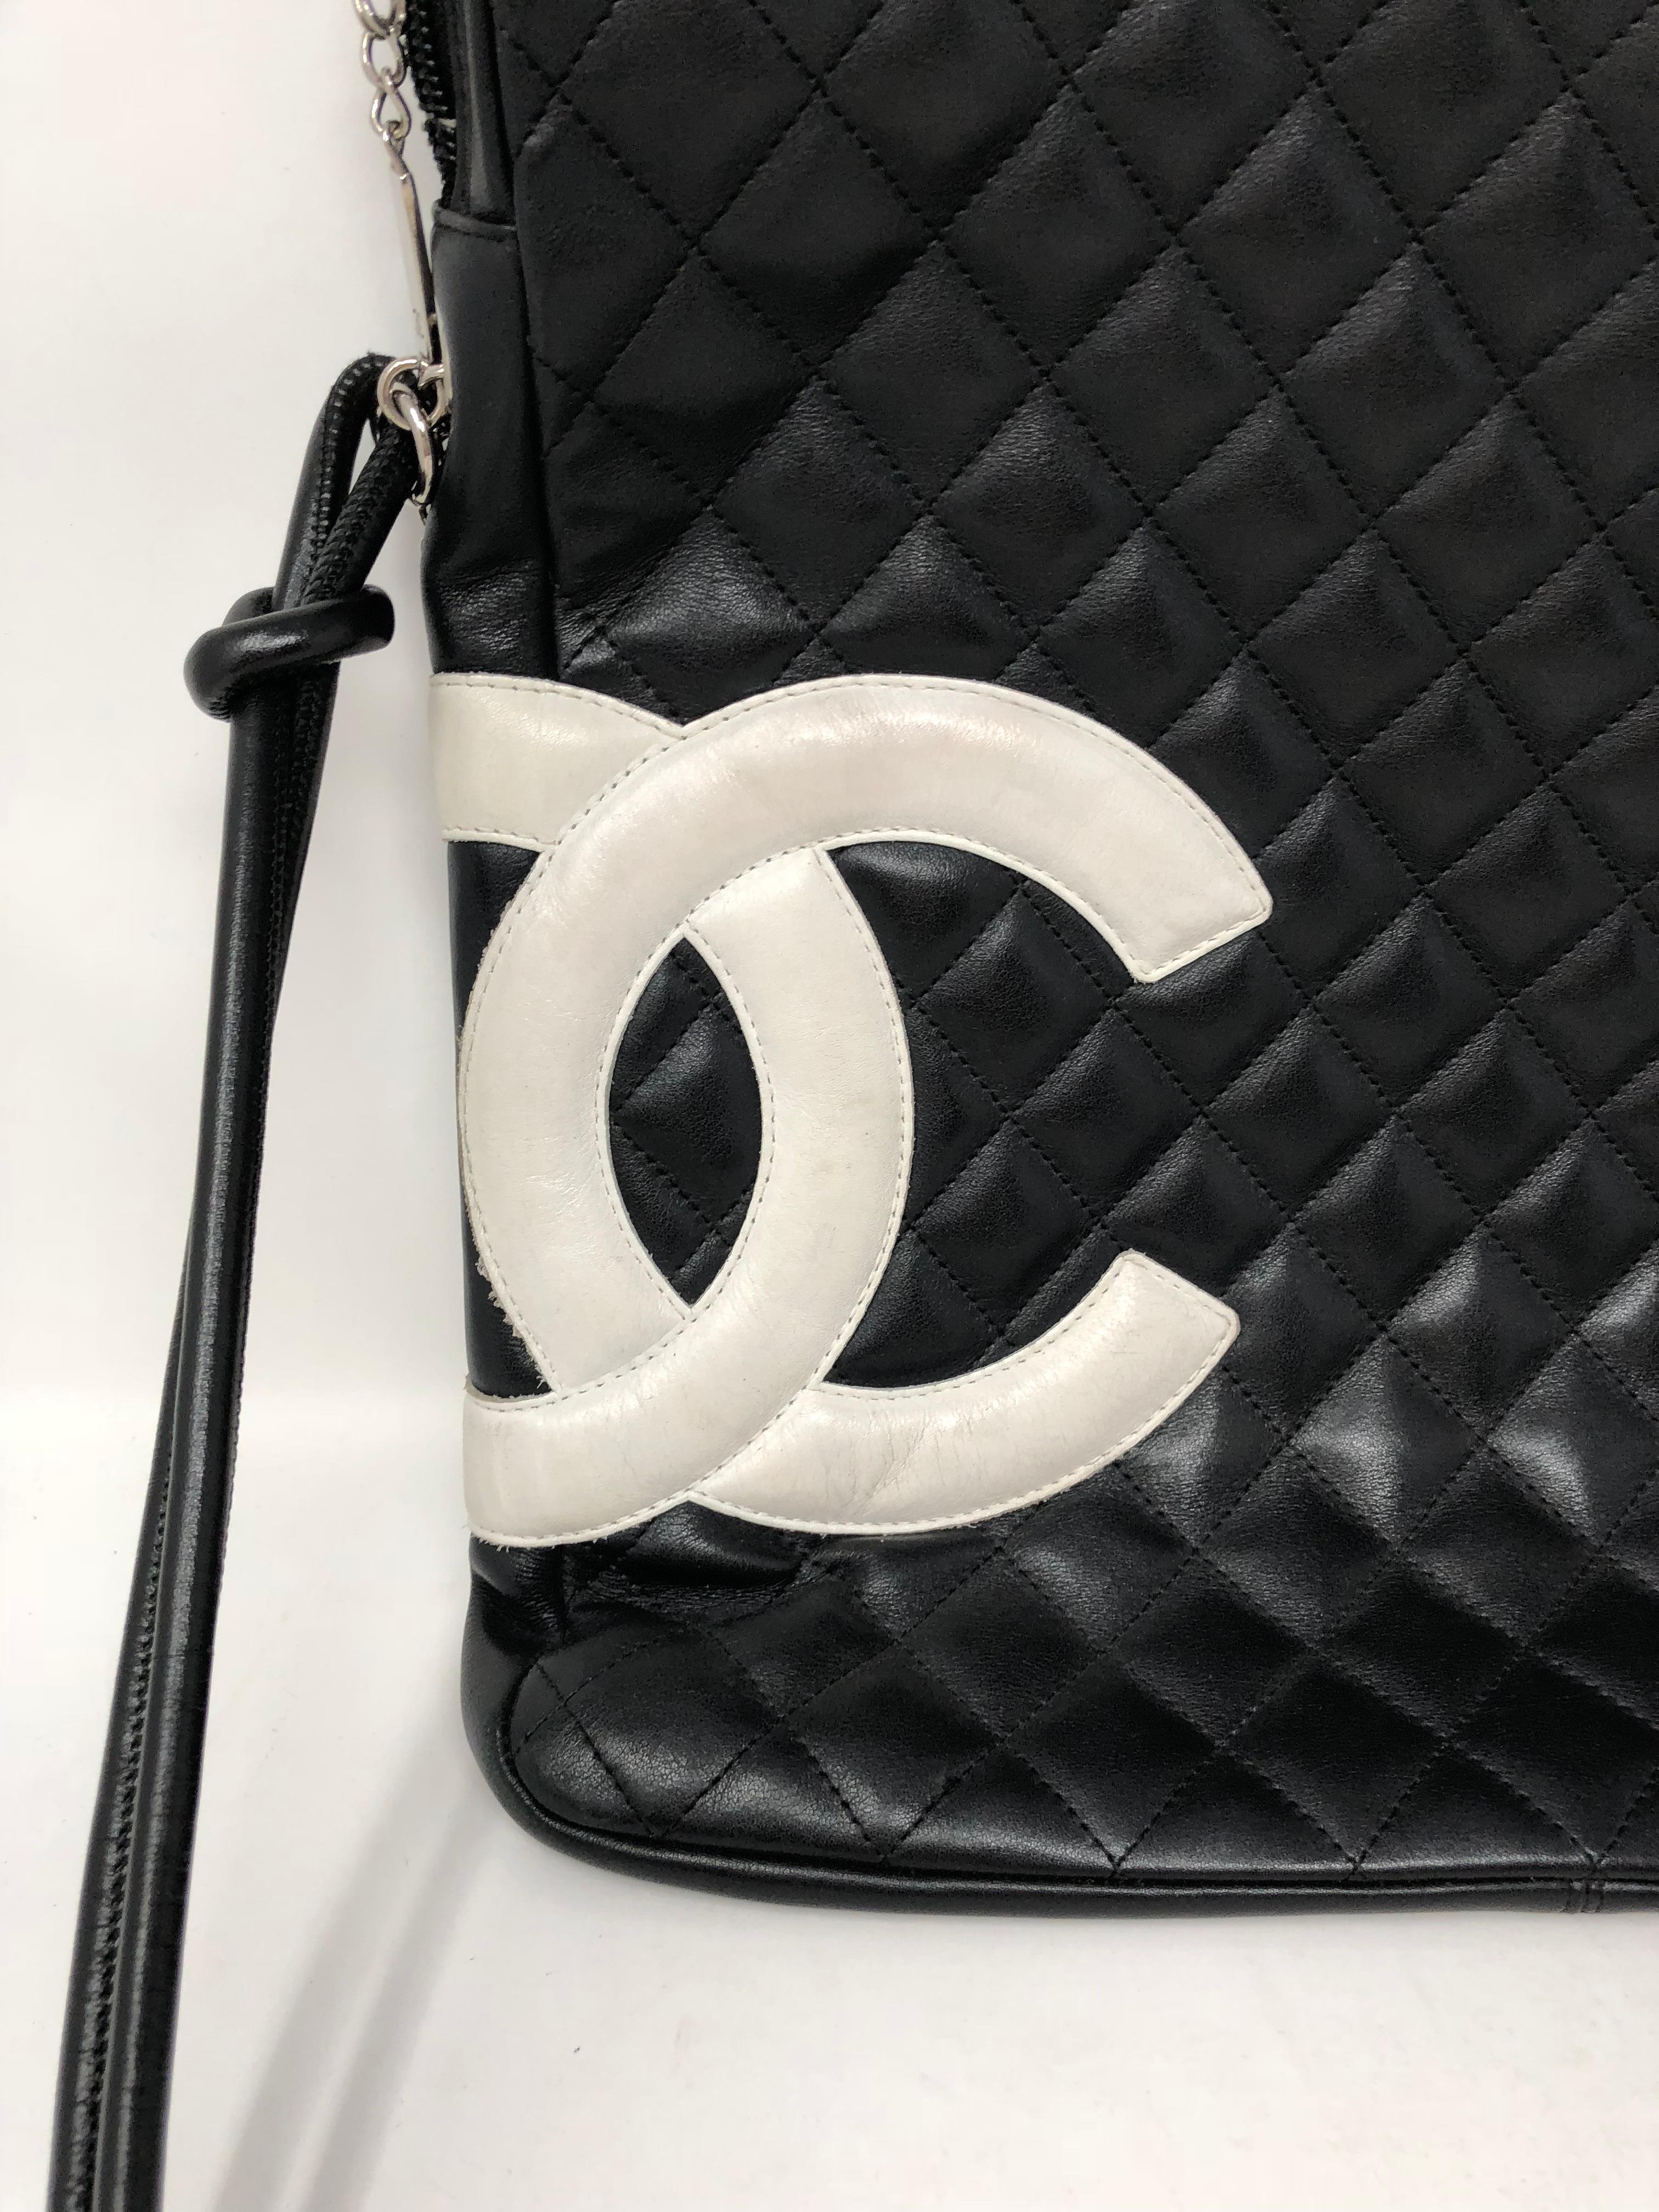 Chanel Black and white C's Cambon Crossbody Messenger bag. Hot pink nylon interior, has some wear inside. Dirt and normal wear. Exterior in good condition. Guaranteed authentic. 